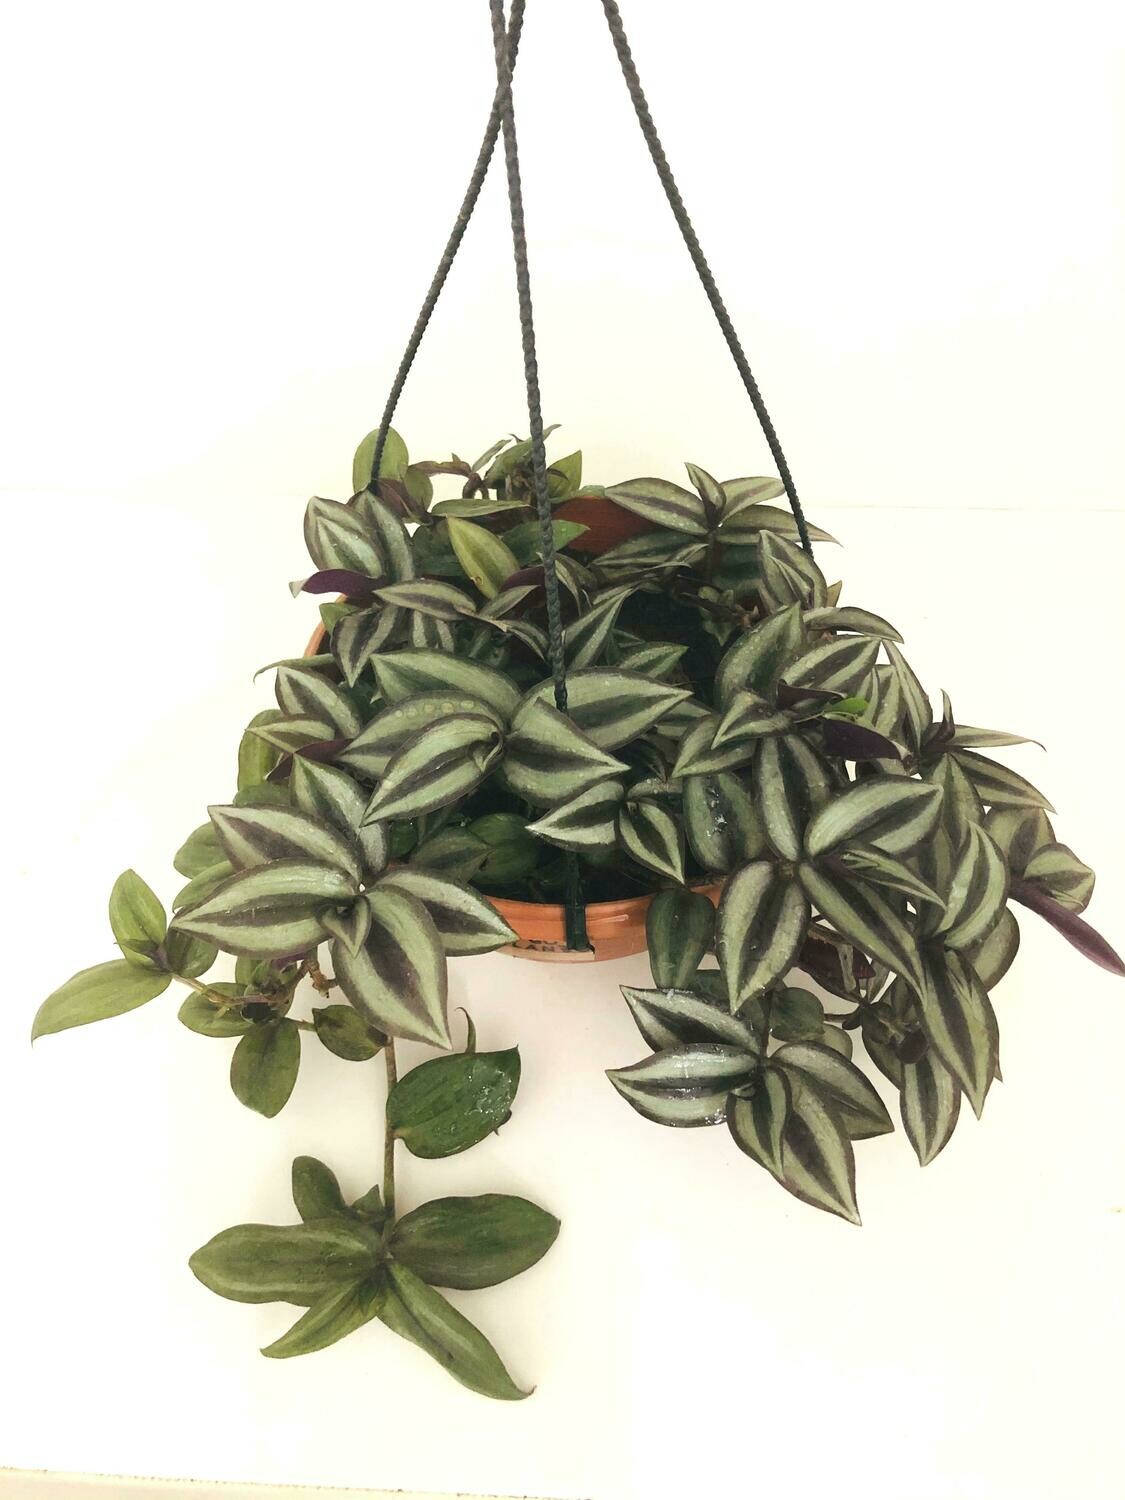 Inch Plant in 7 inches Nursery Hanging Basket